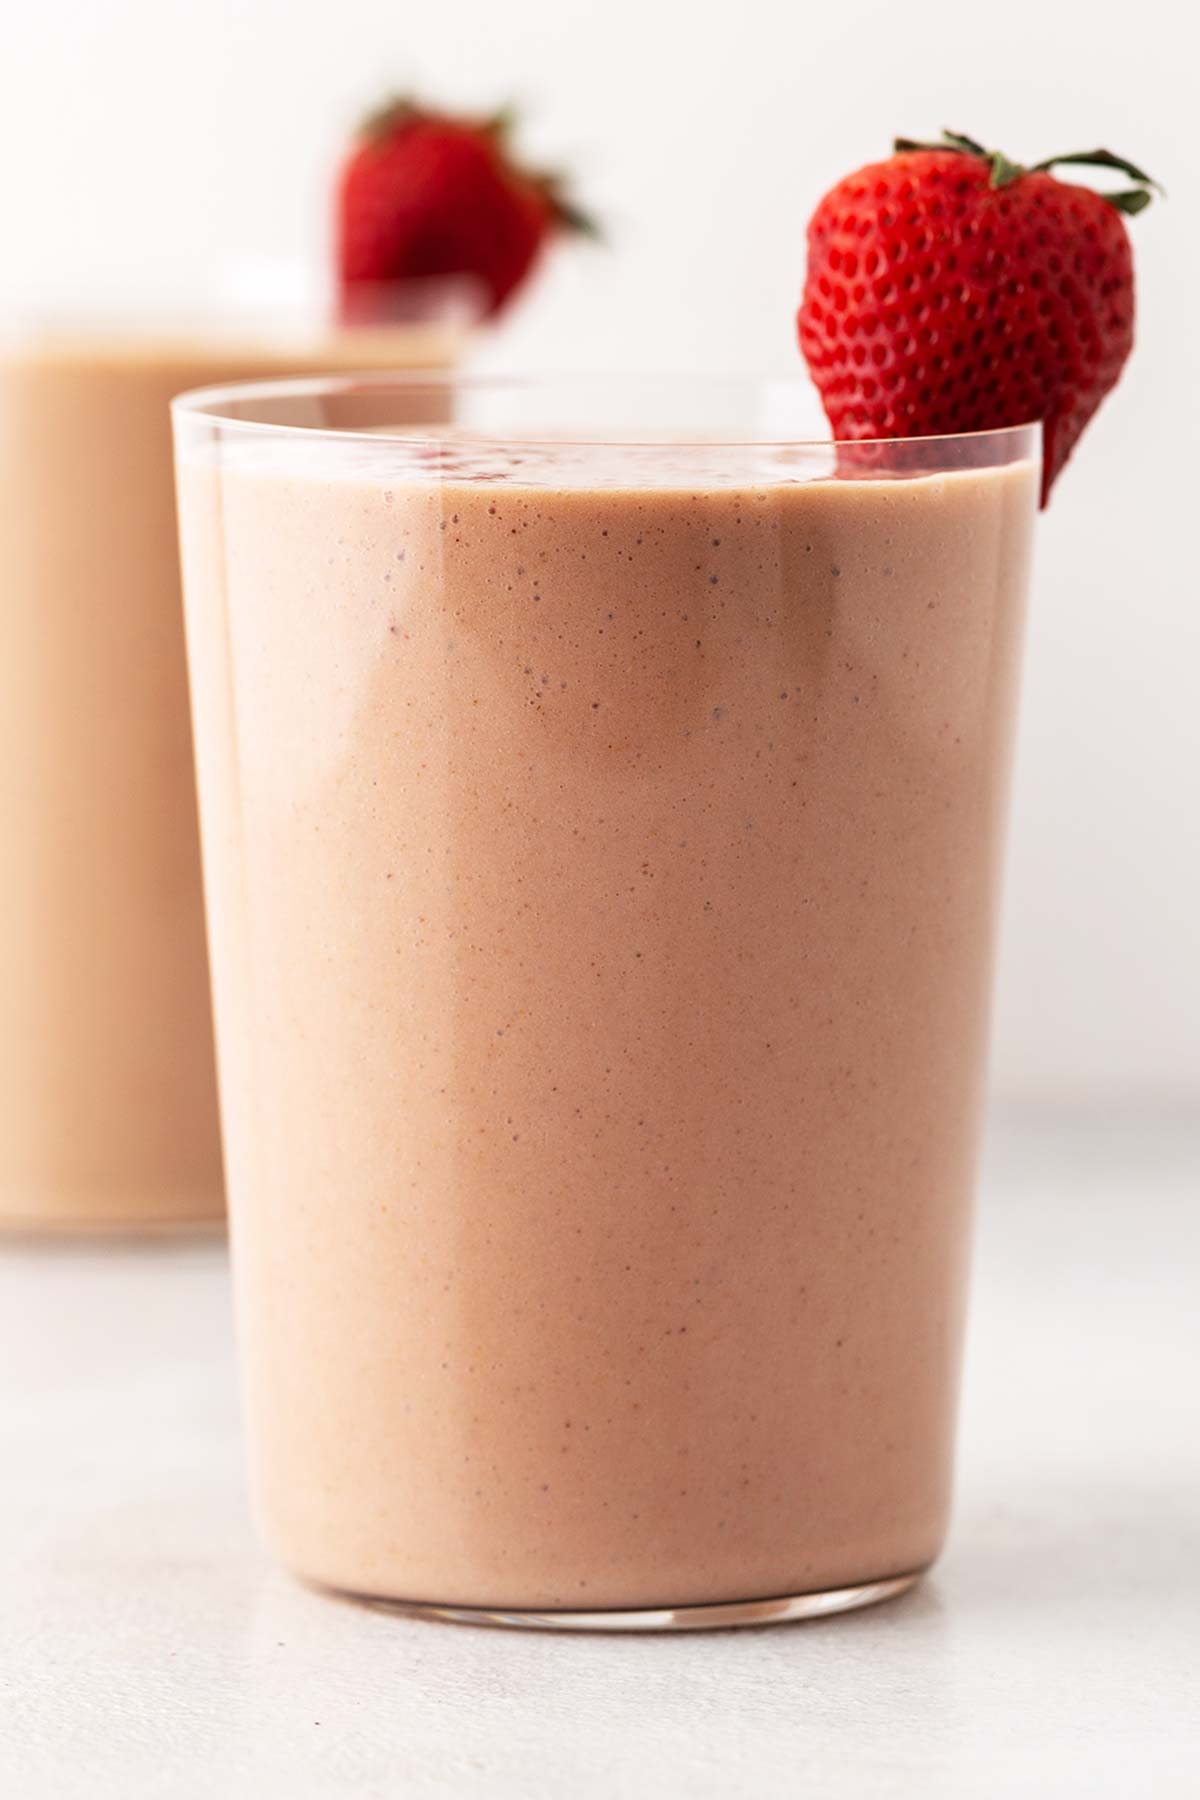 Strawberry banana protein shake in a glass.